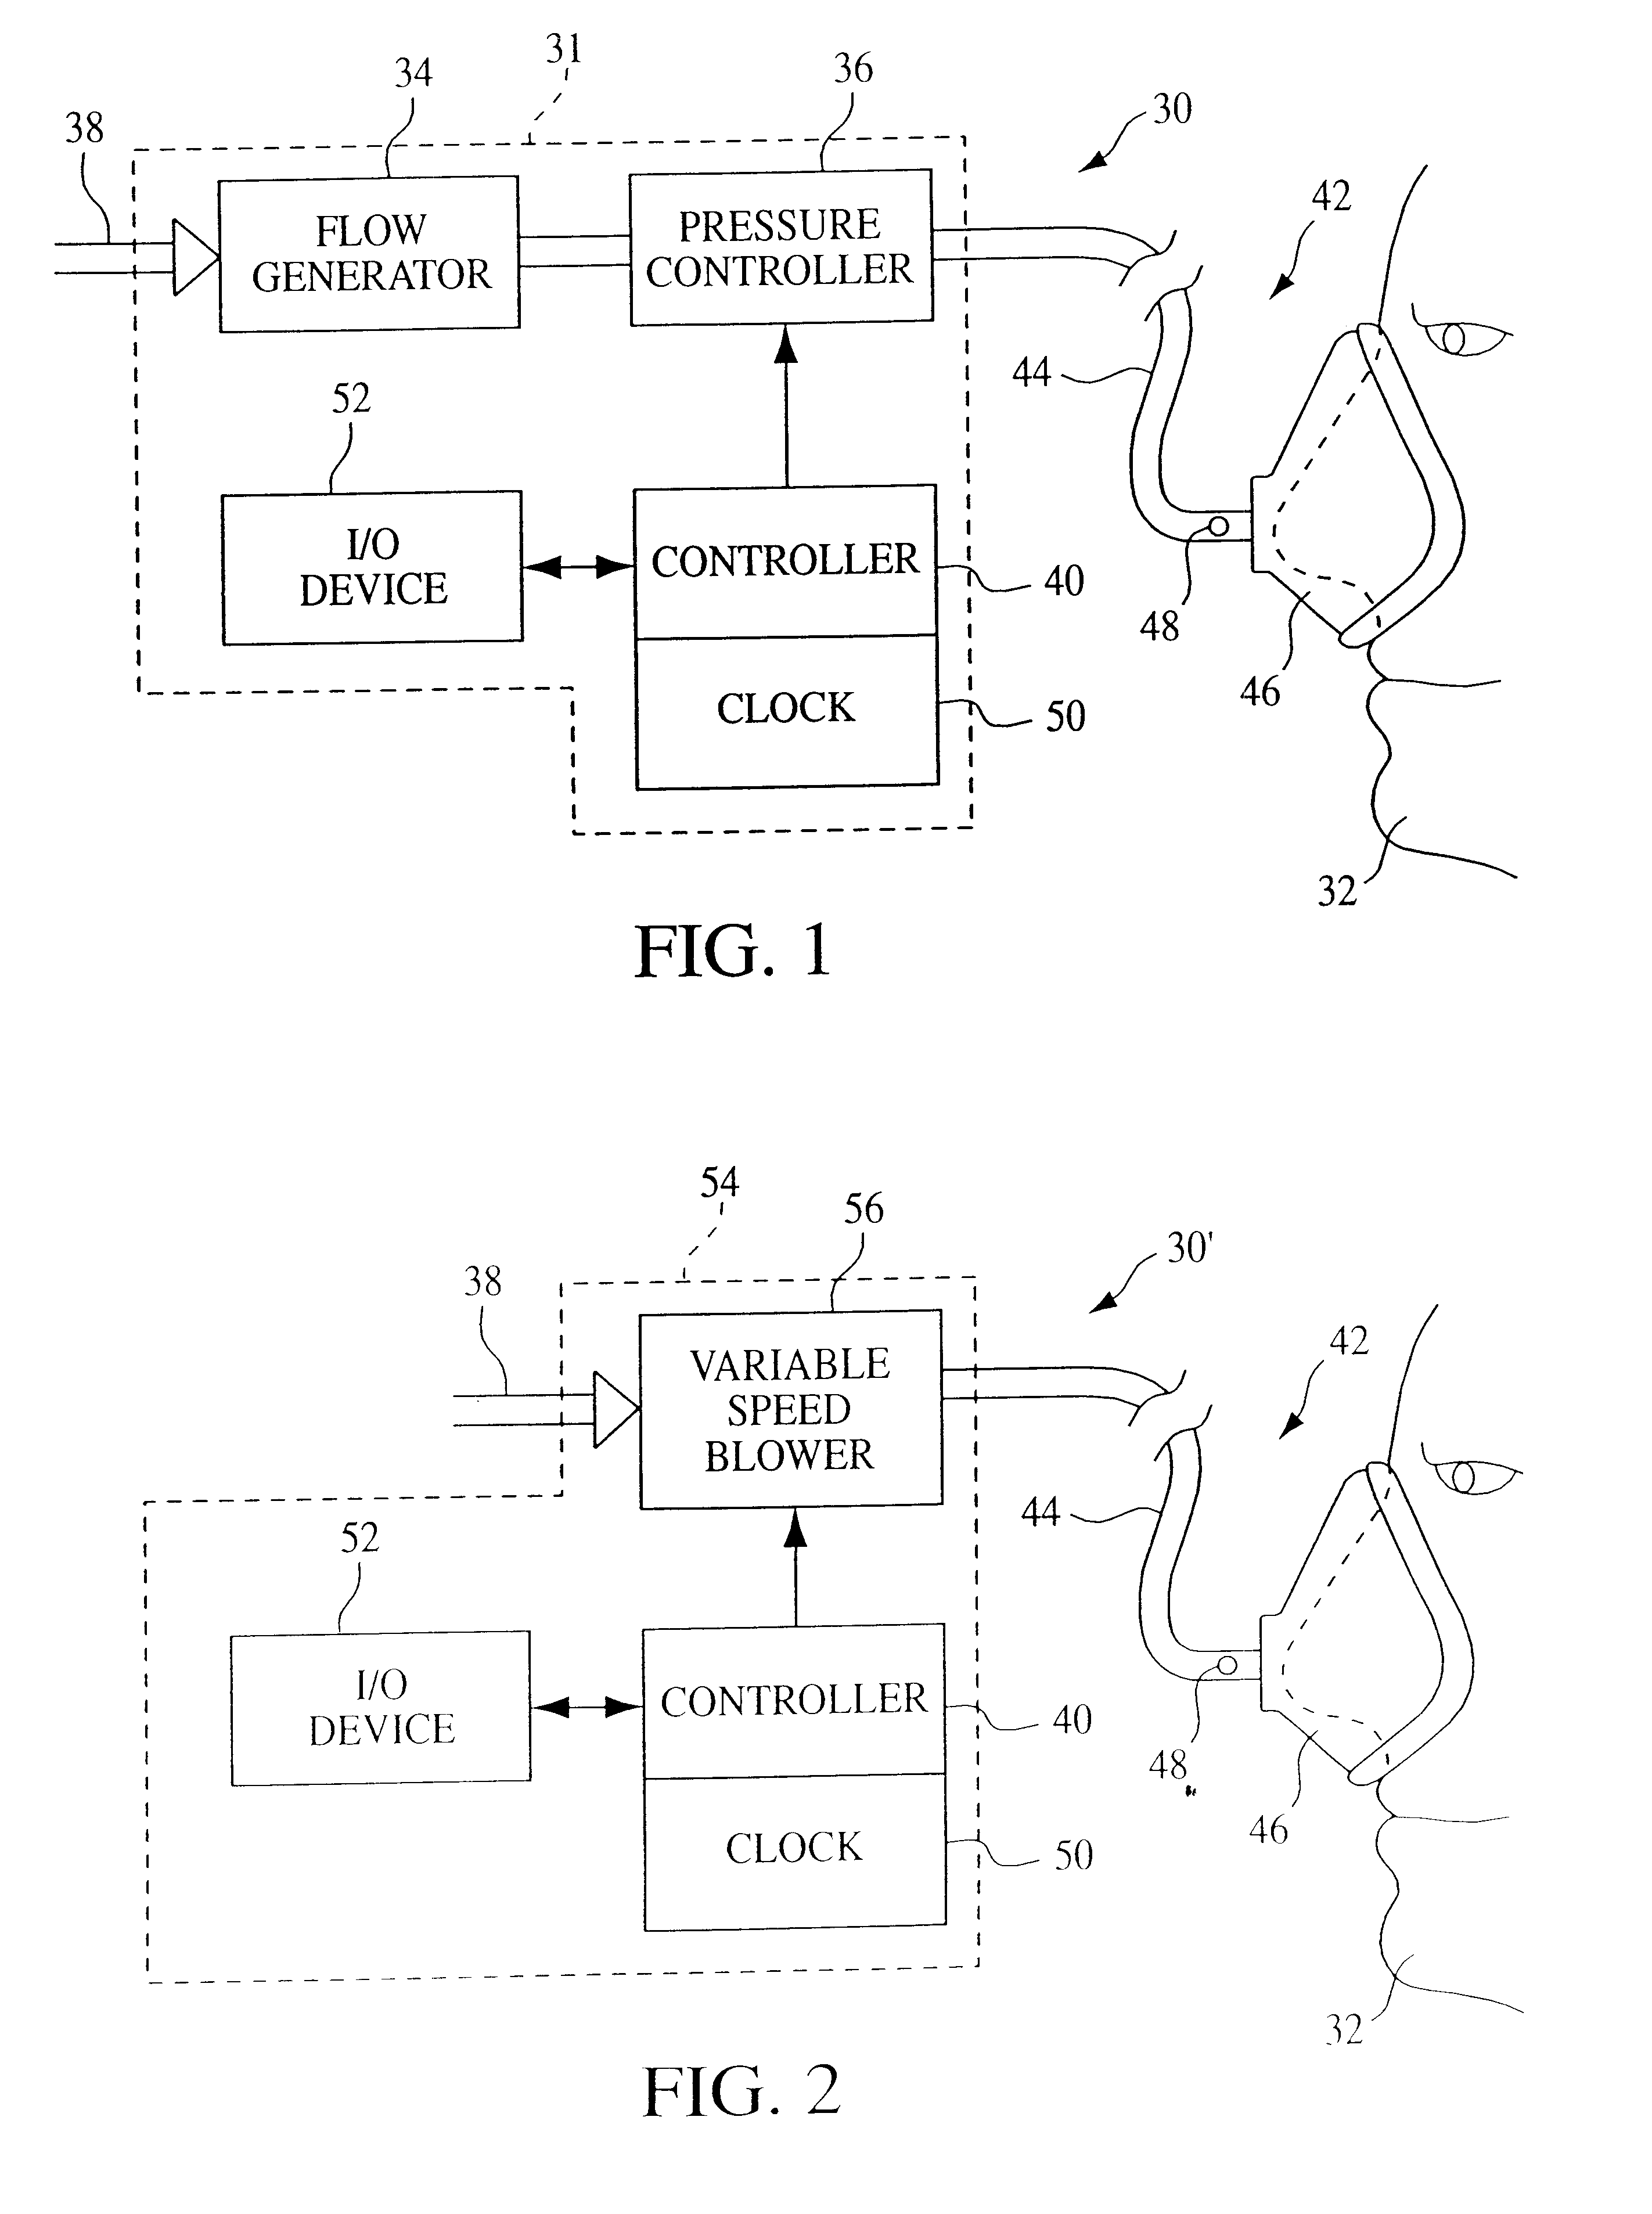 Apparatus and method of providing continuous positive airway pressure